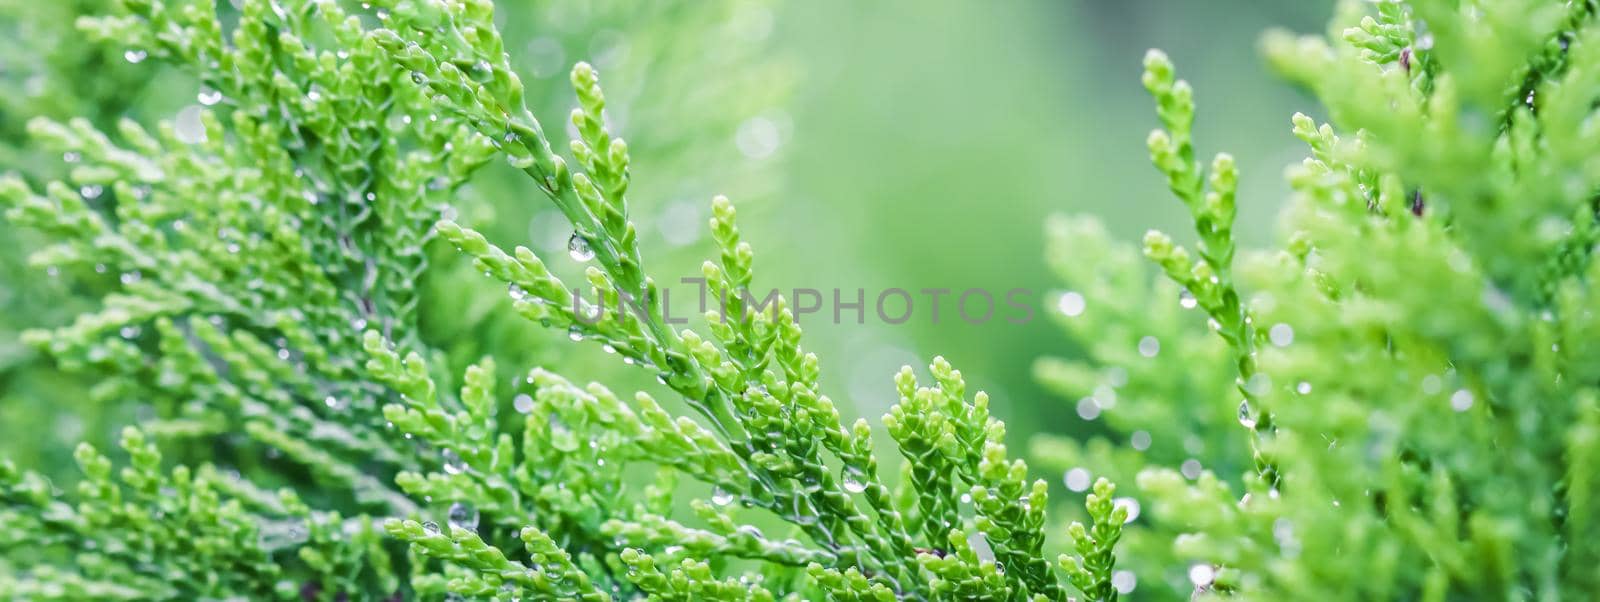 Closeup green leaves of evergreen coniferous tree Lawson Cypress or Chamaecyparis lawsoniana after the rain. Extreme bokeh with light reflection. Macro photography, selective focus, blurred background by Olayola